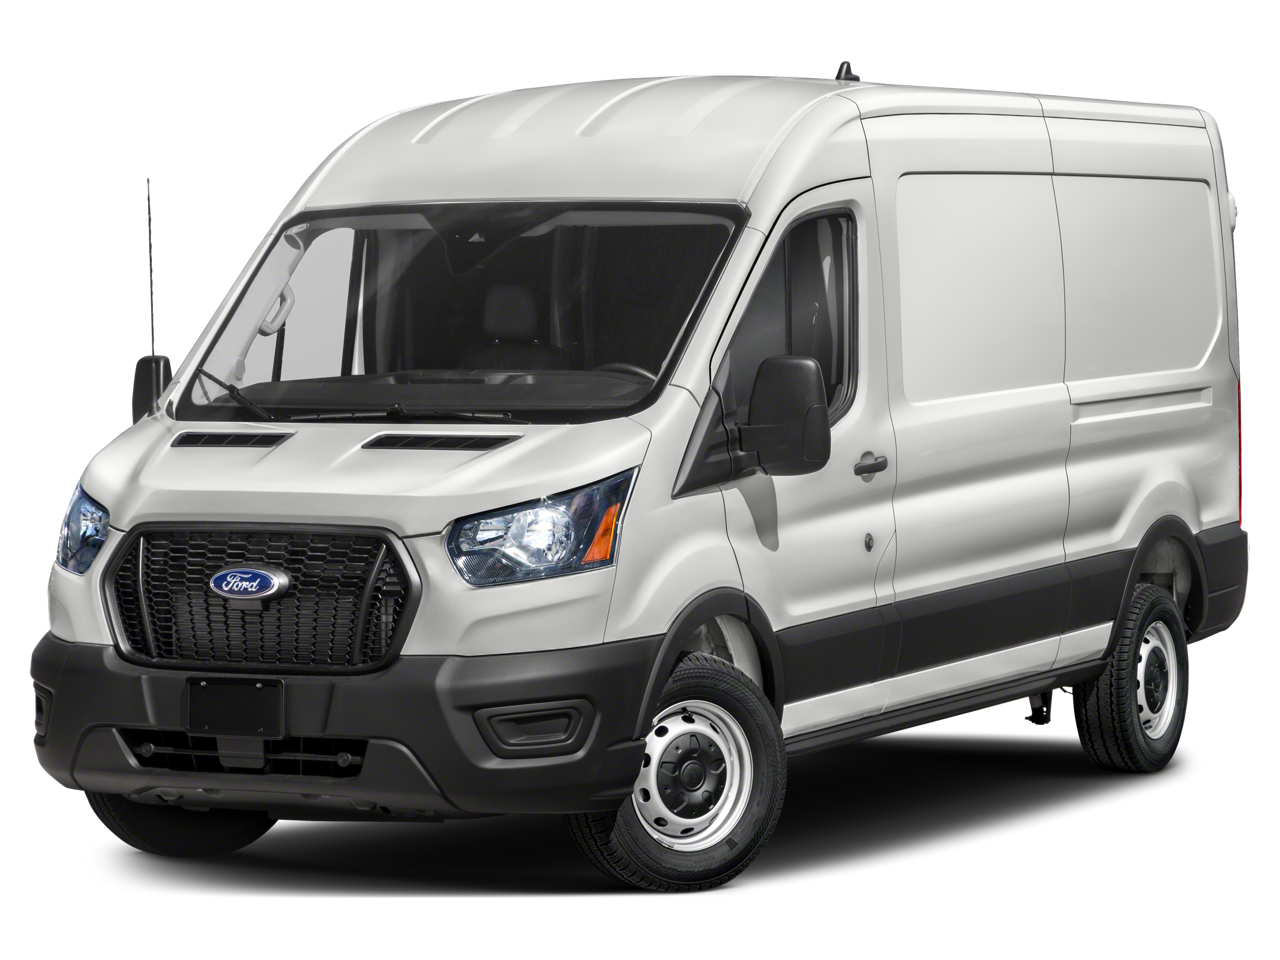 2023 Ford Transit-350 Base HIGH ROOF CARGO 148" WB 3.5L ECOBOOST